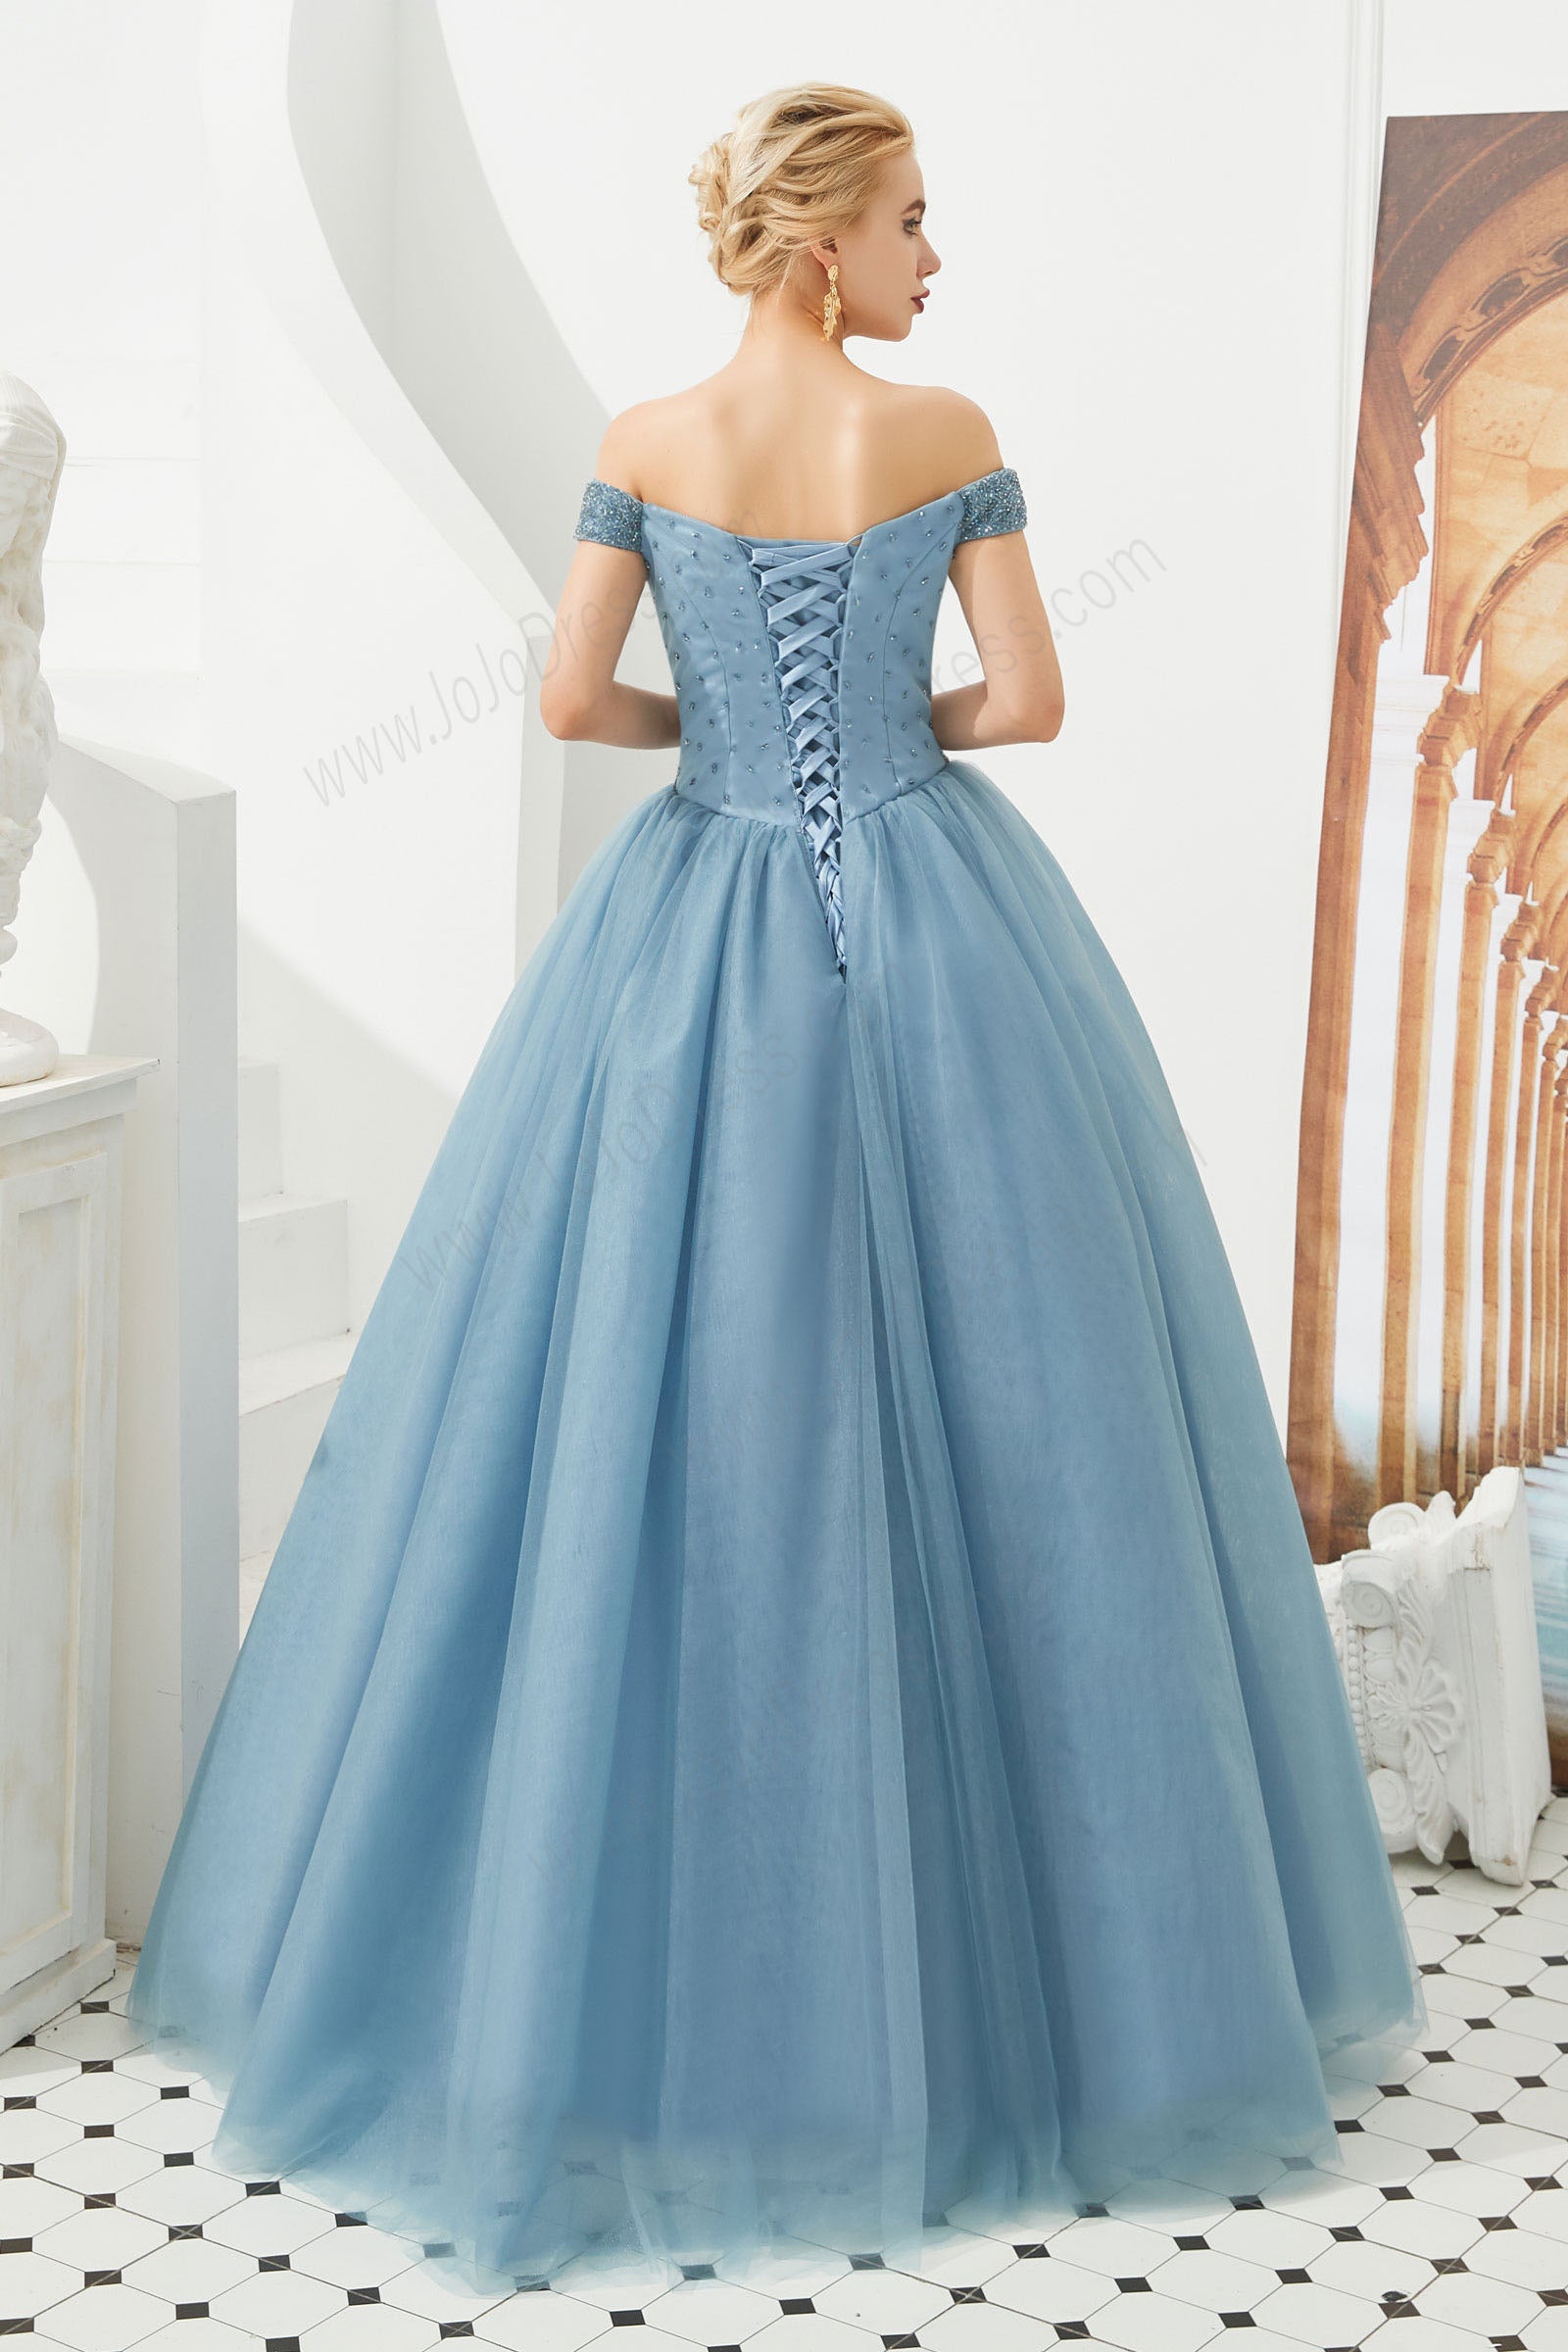 Dusty Blue Ball Gown Prom Evening Dress ...